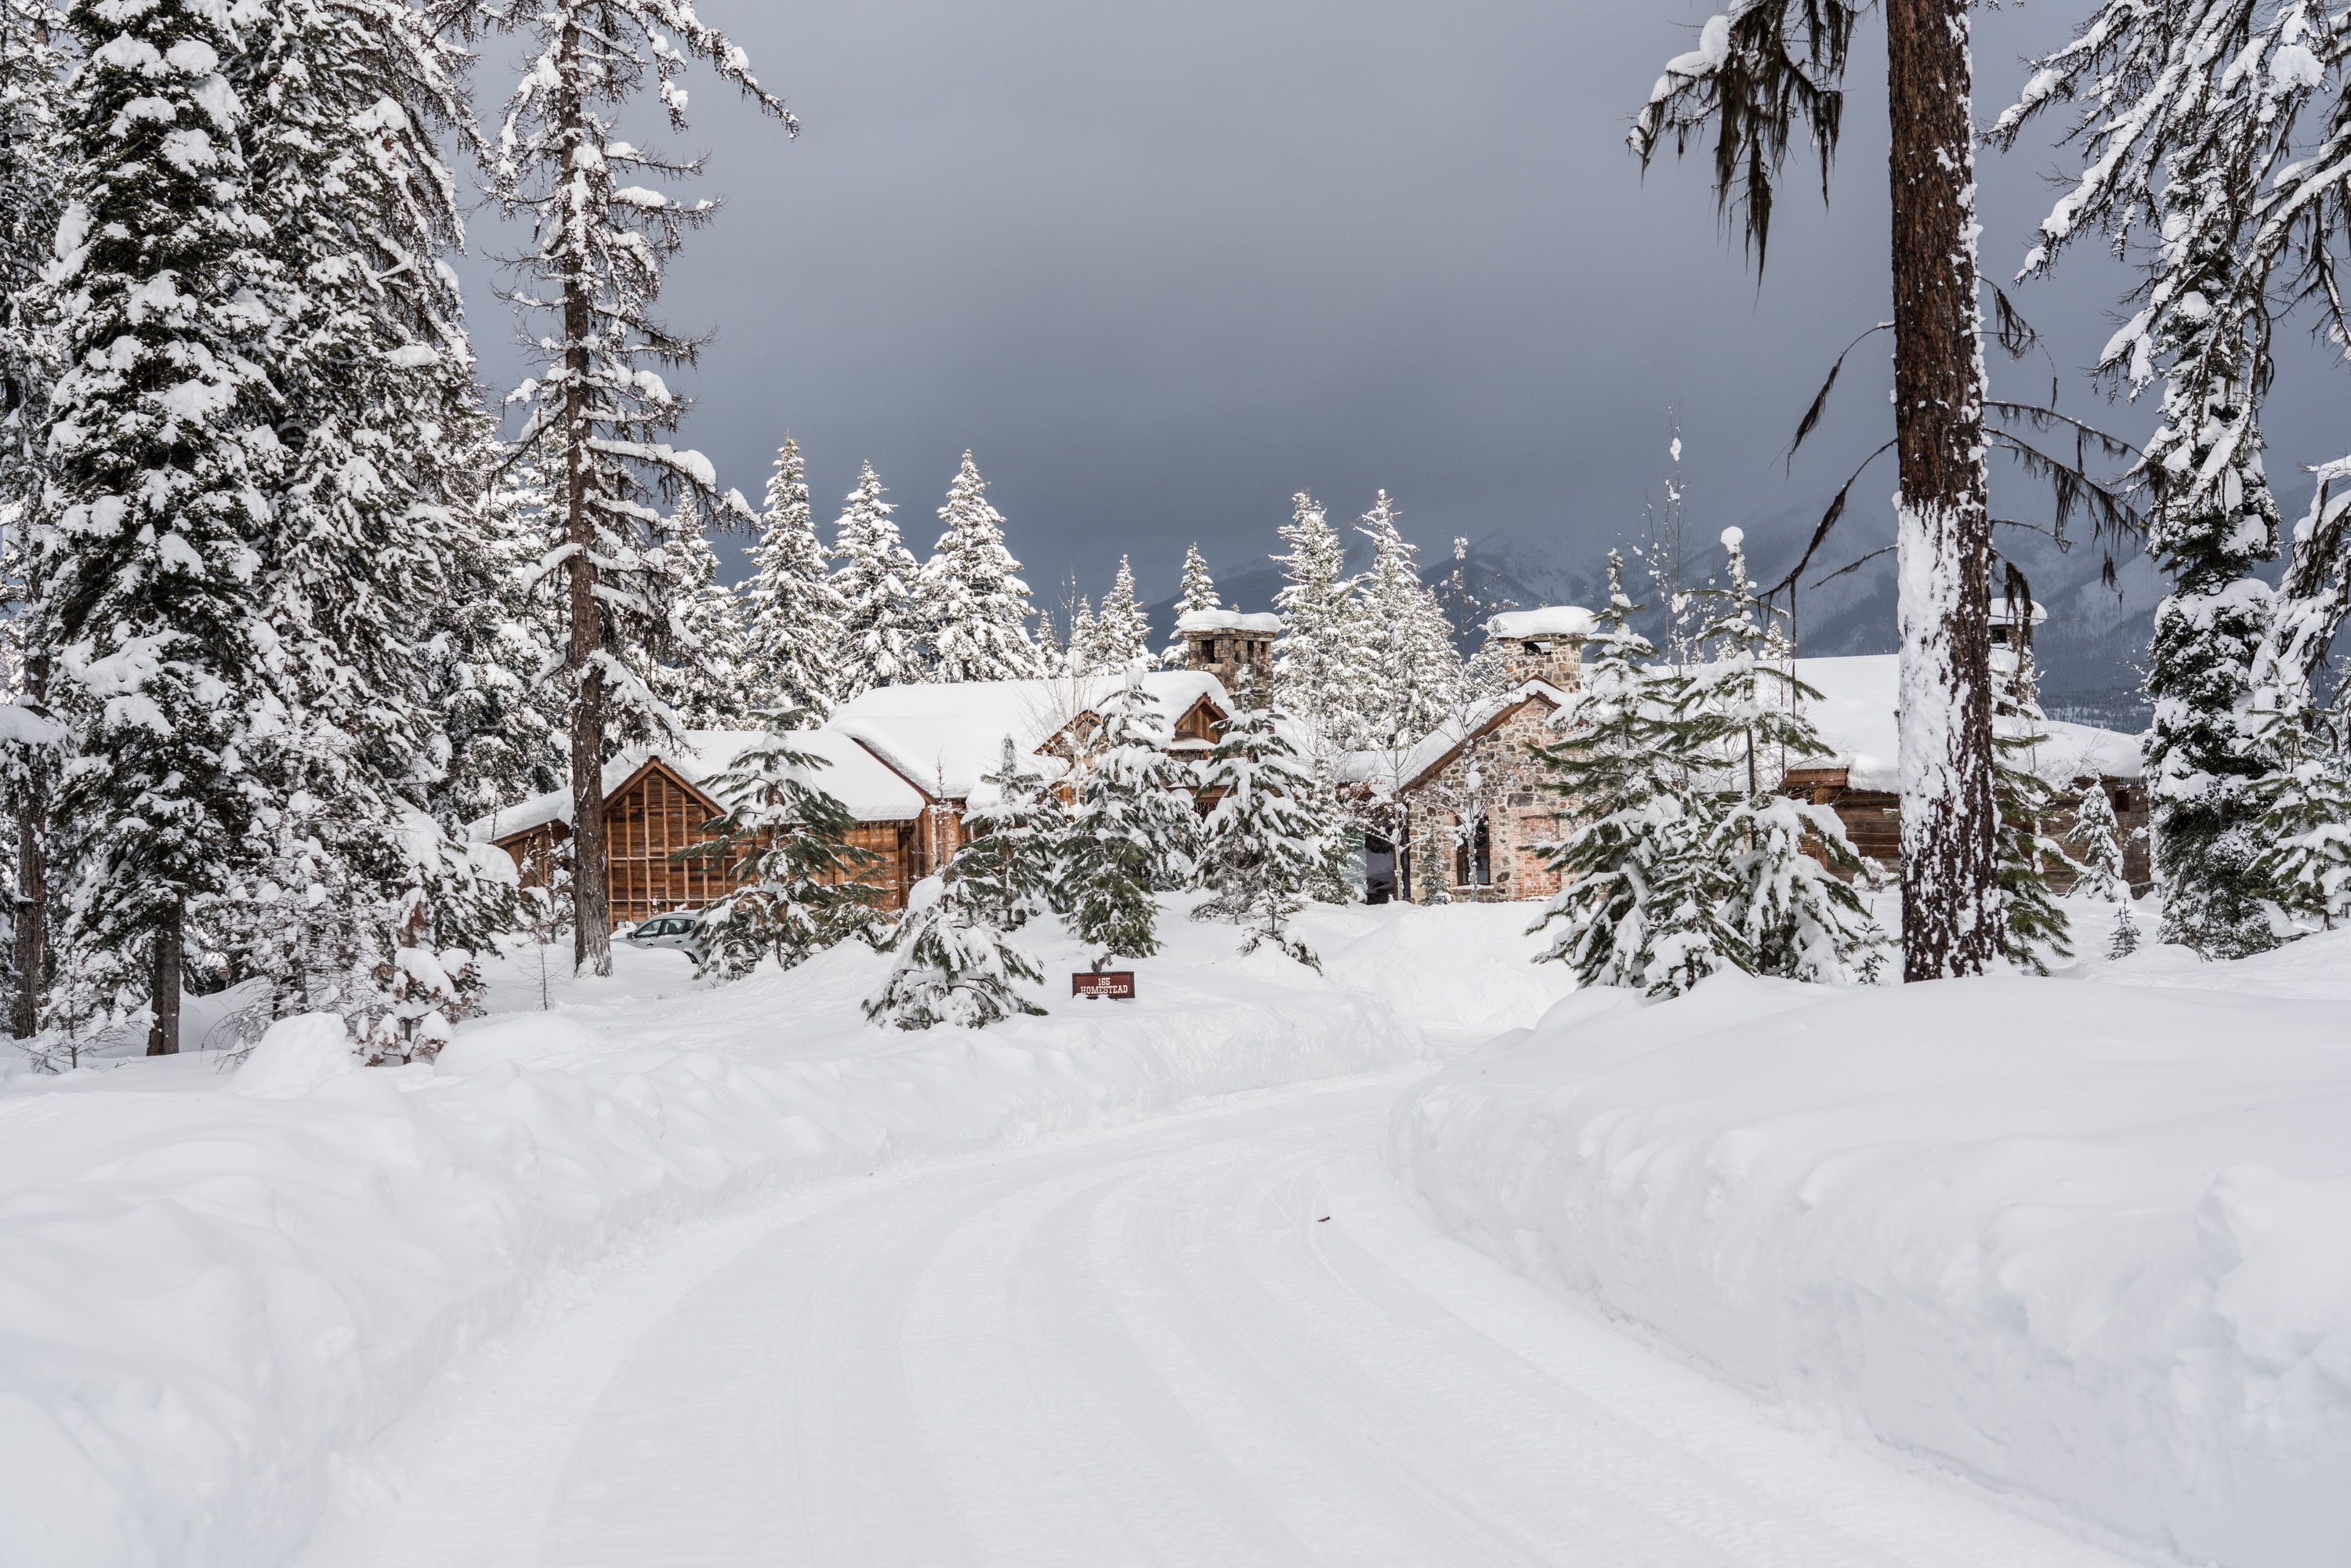 15 Best Winter Holidays with Snow